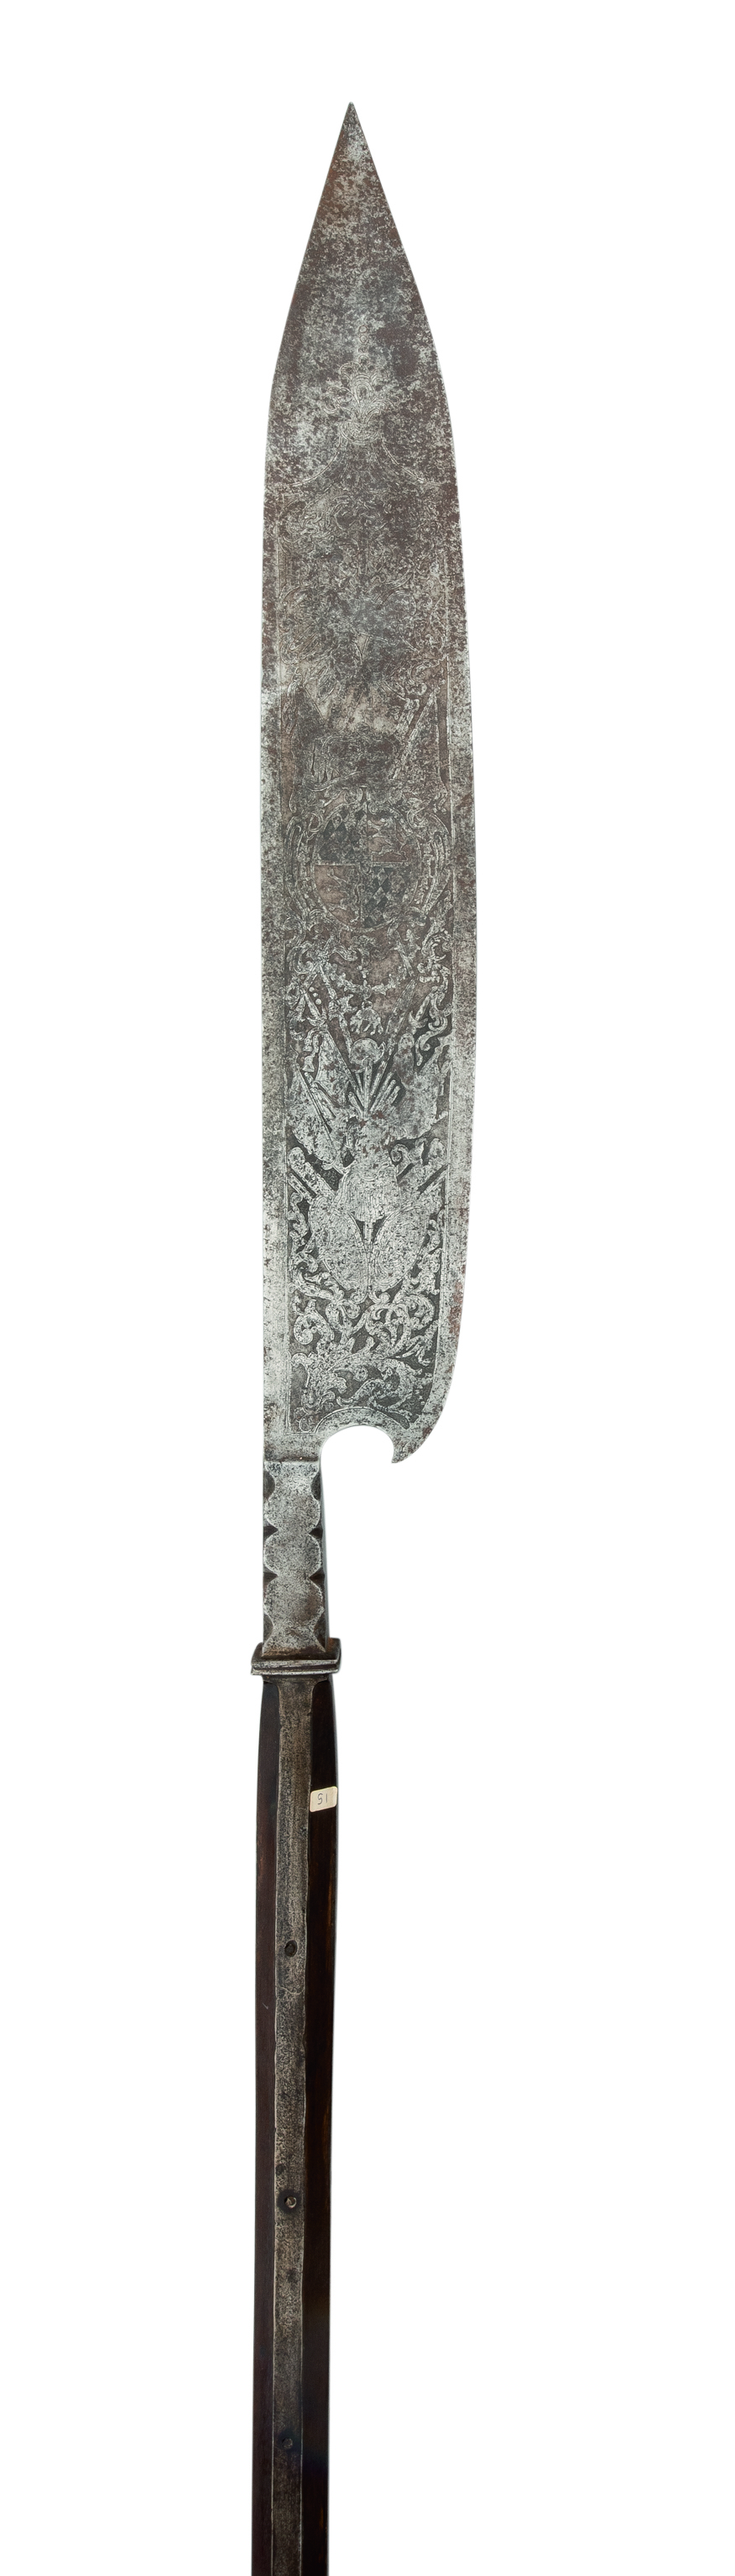 Property from a Central European Collection A RARE GERMAN (BAVARIAN) STATE GLAIVE (KUSE) FOR THE GUA